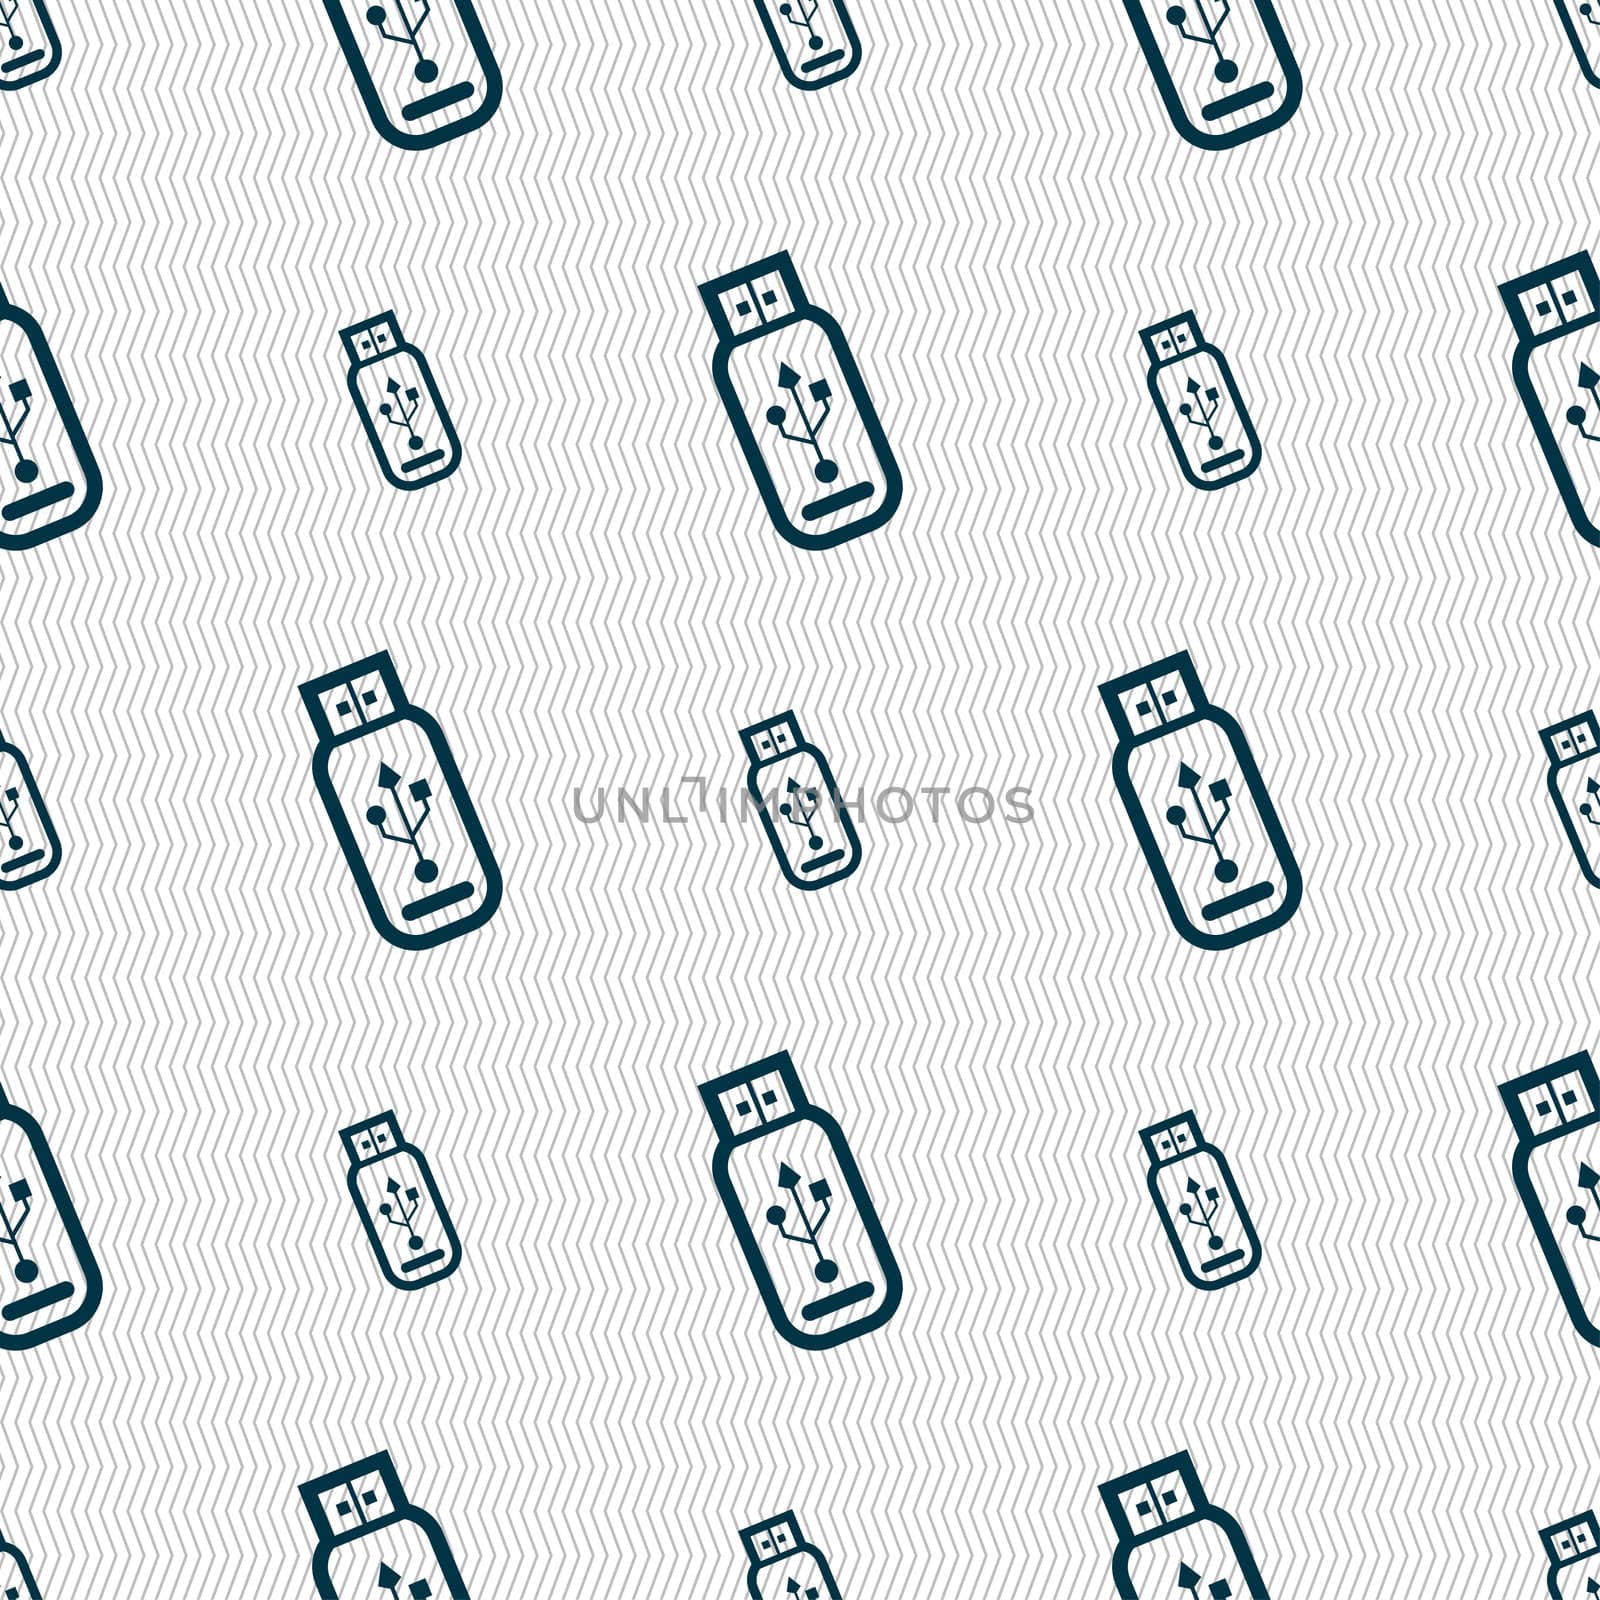 Usb flash drive icon sign. Seamless pattern with geometric texture. illustration